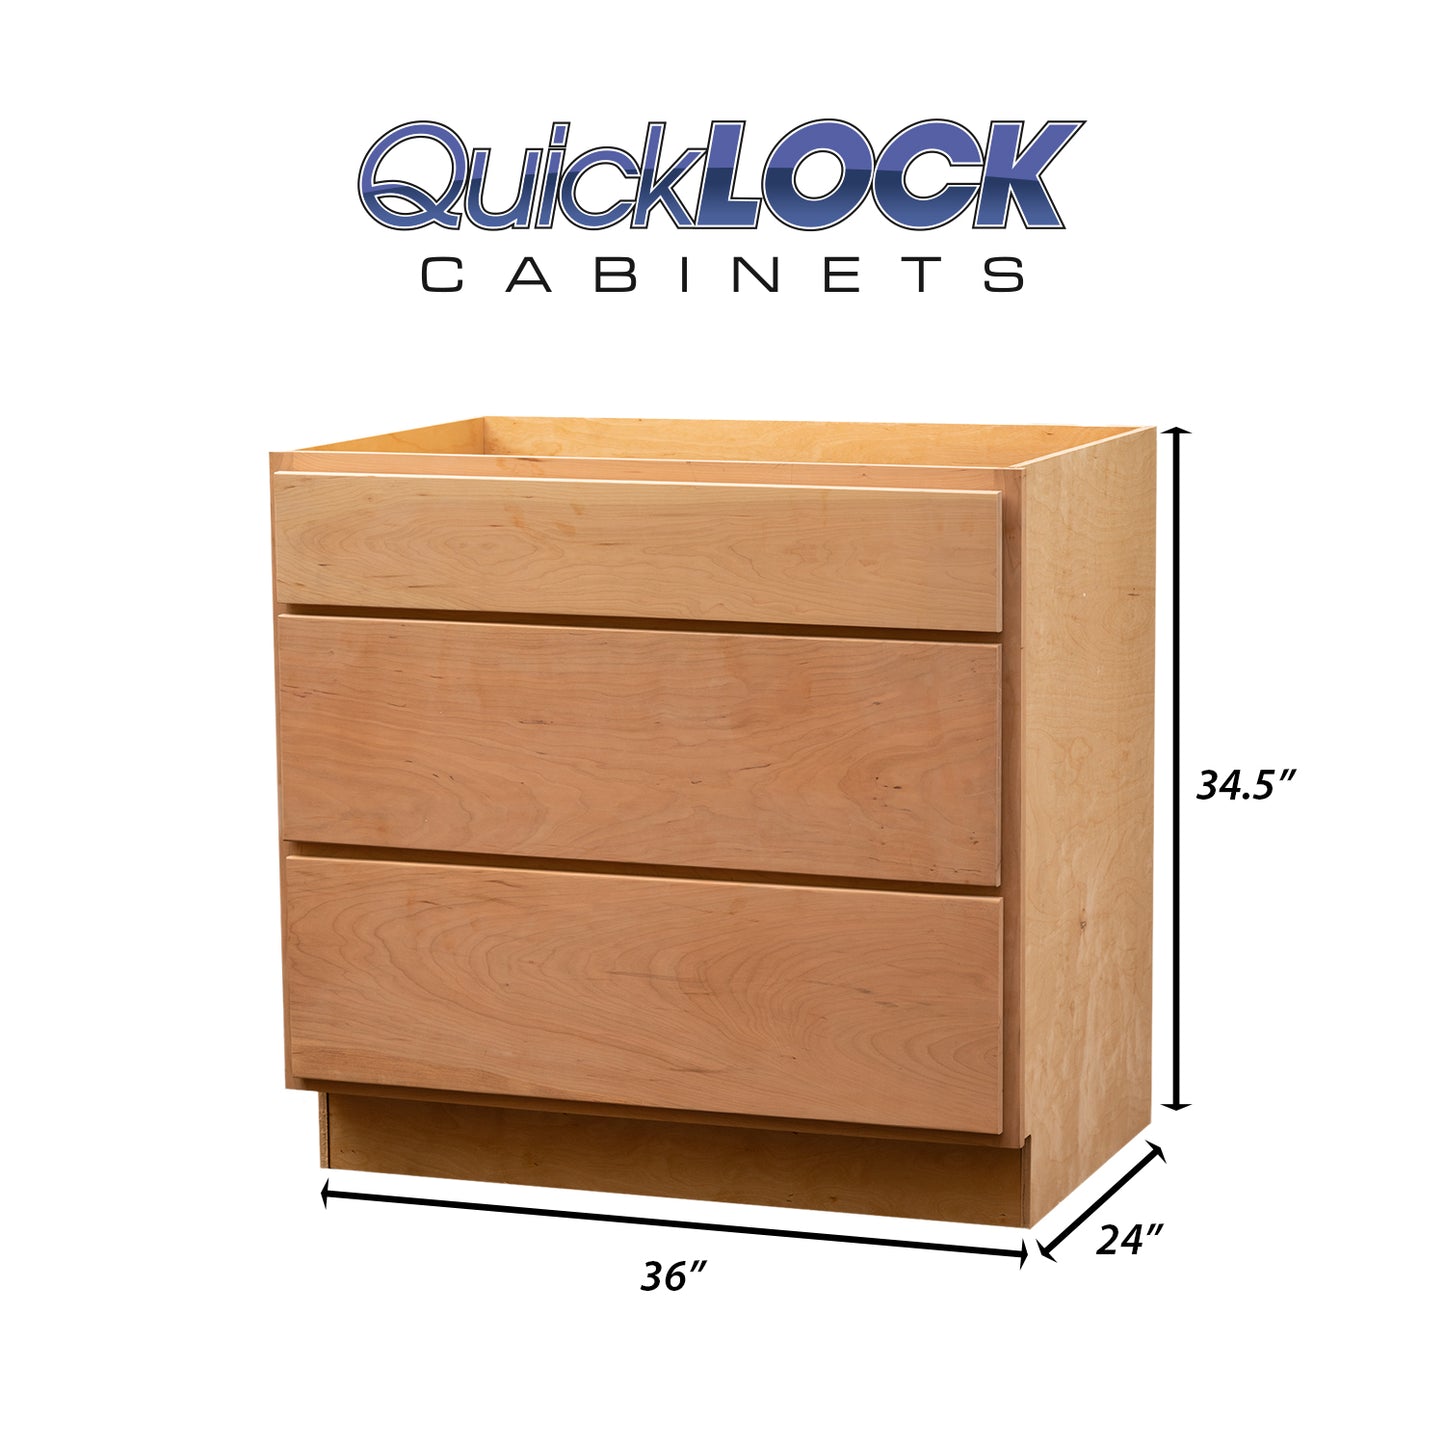 Quicklock RTA (Ready-to-Assemble) Raw Cherry 3 Drawer Base Cabinet - 36" W